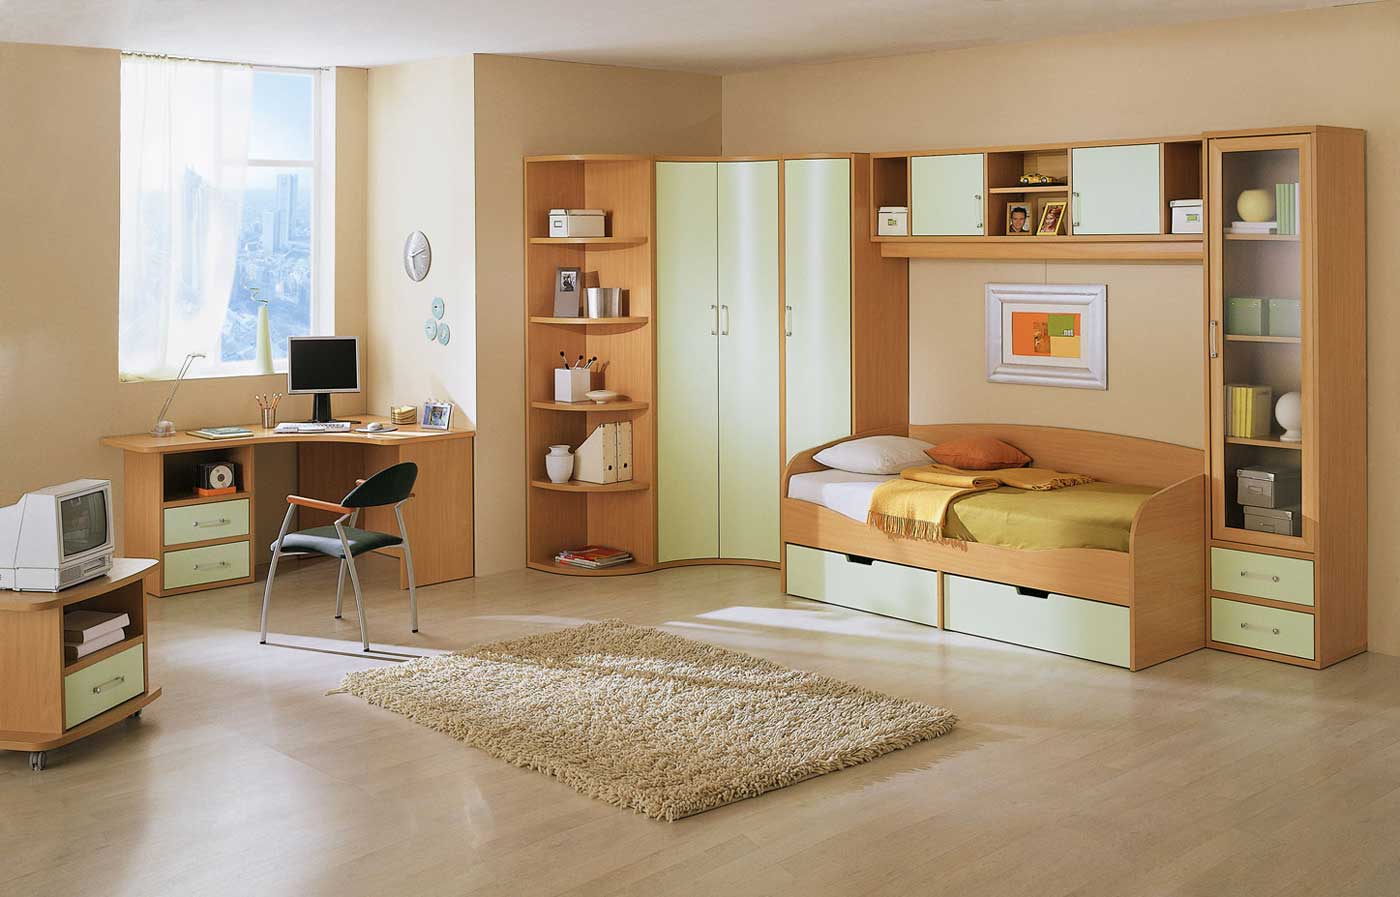 19 Excellent Kids Bedroom Sets: Combining The Color Ideas - Interior Design Inspirations